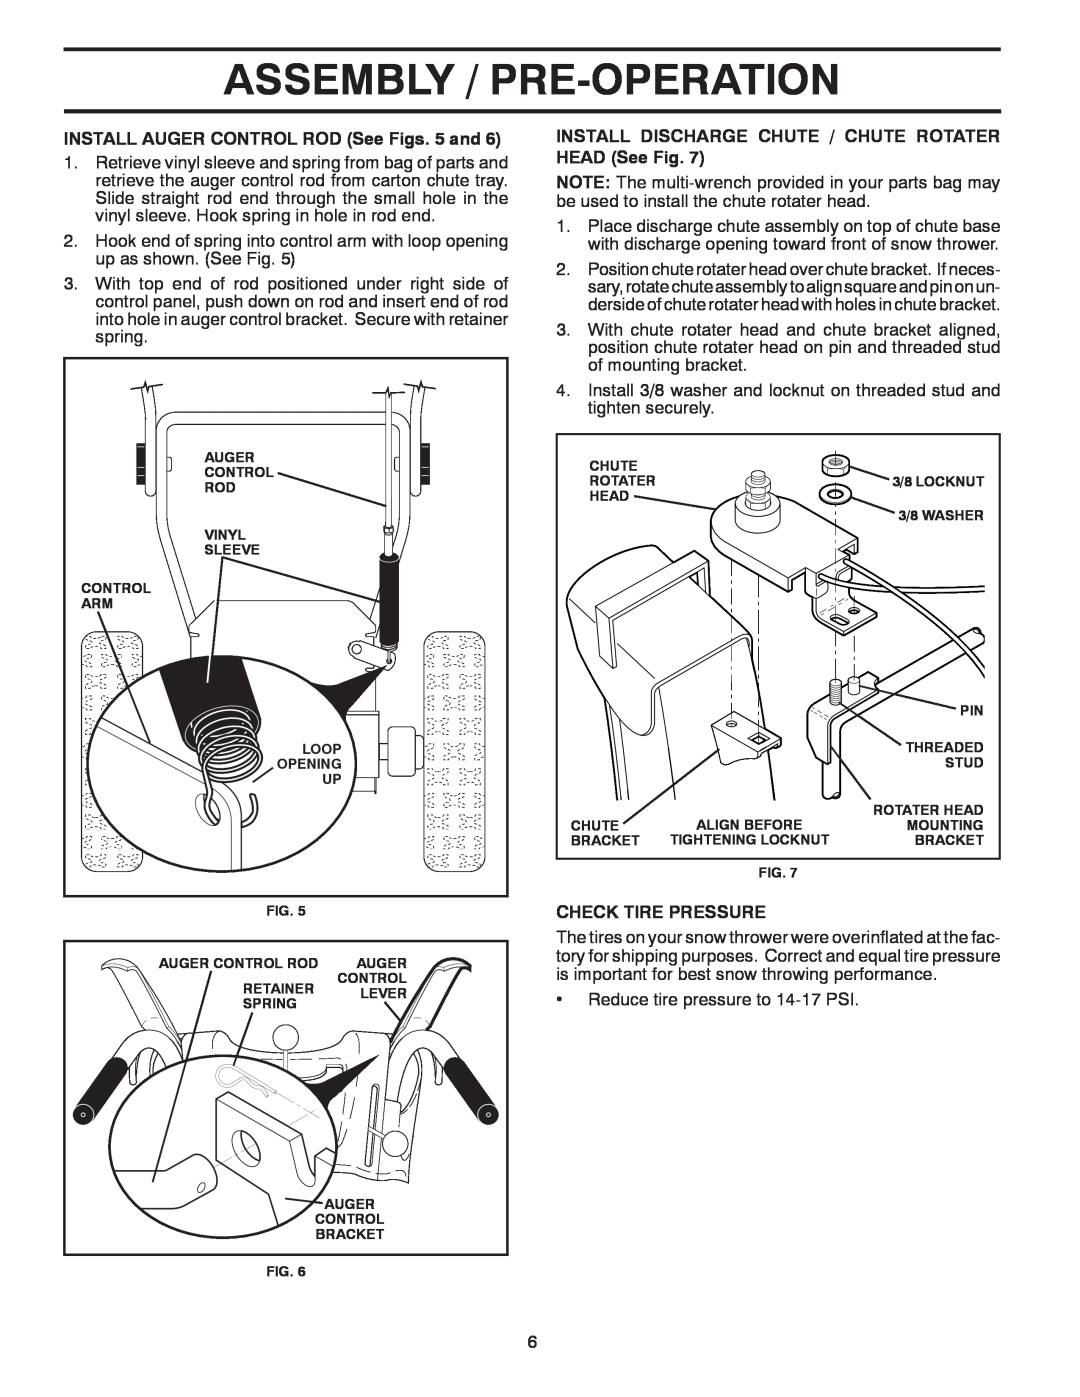 McCulloch 96192004001 owner manual Assembly / Pre-Operation, INSTALL AUGER CONTROL ROD See Figs. 5 and, Check Tire Pressure 